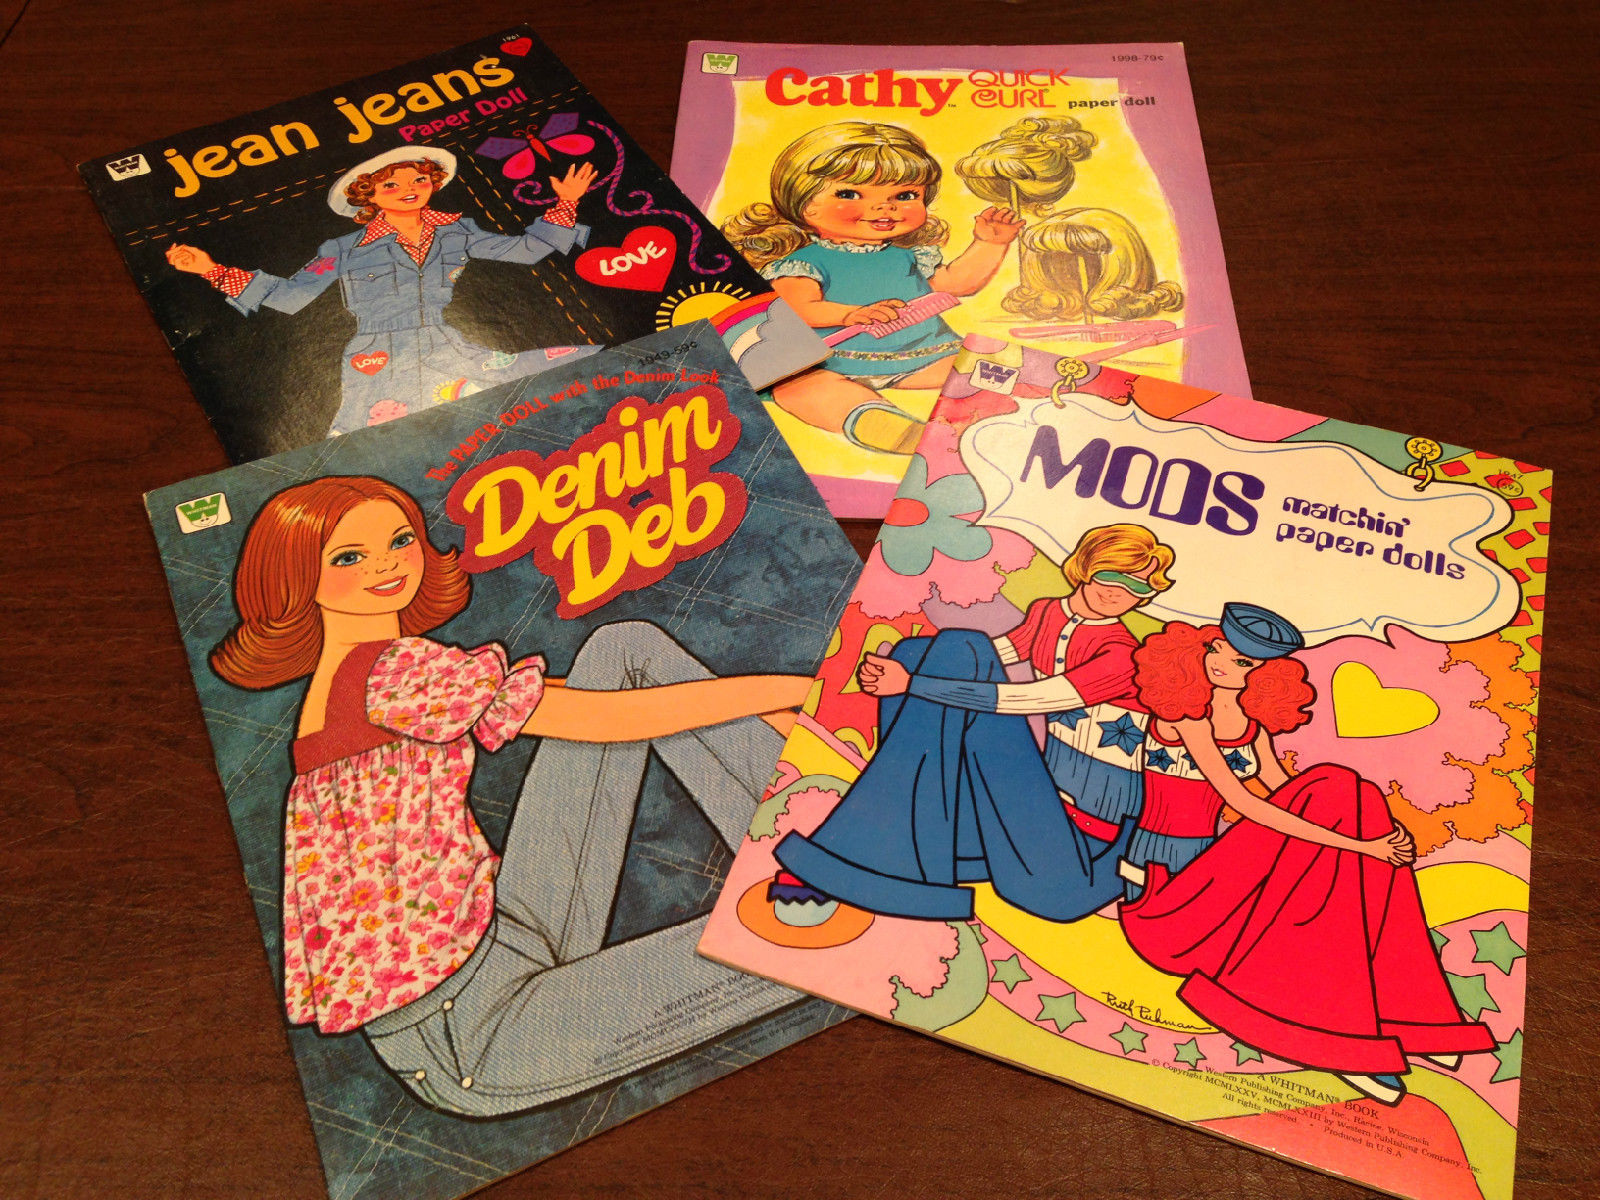 Lot of 4 VINTAGE 1970's New/Unused WHITMAN PAPER DOLL DRESS-UP DOLLS Books